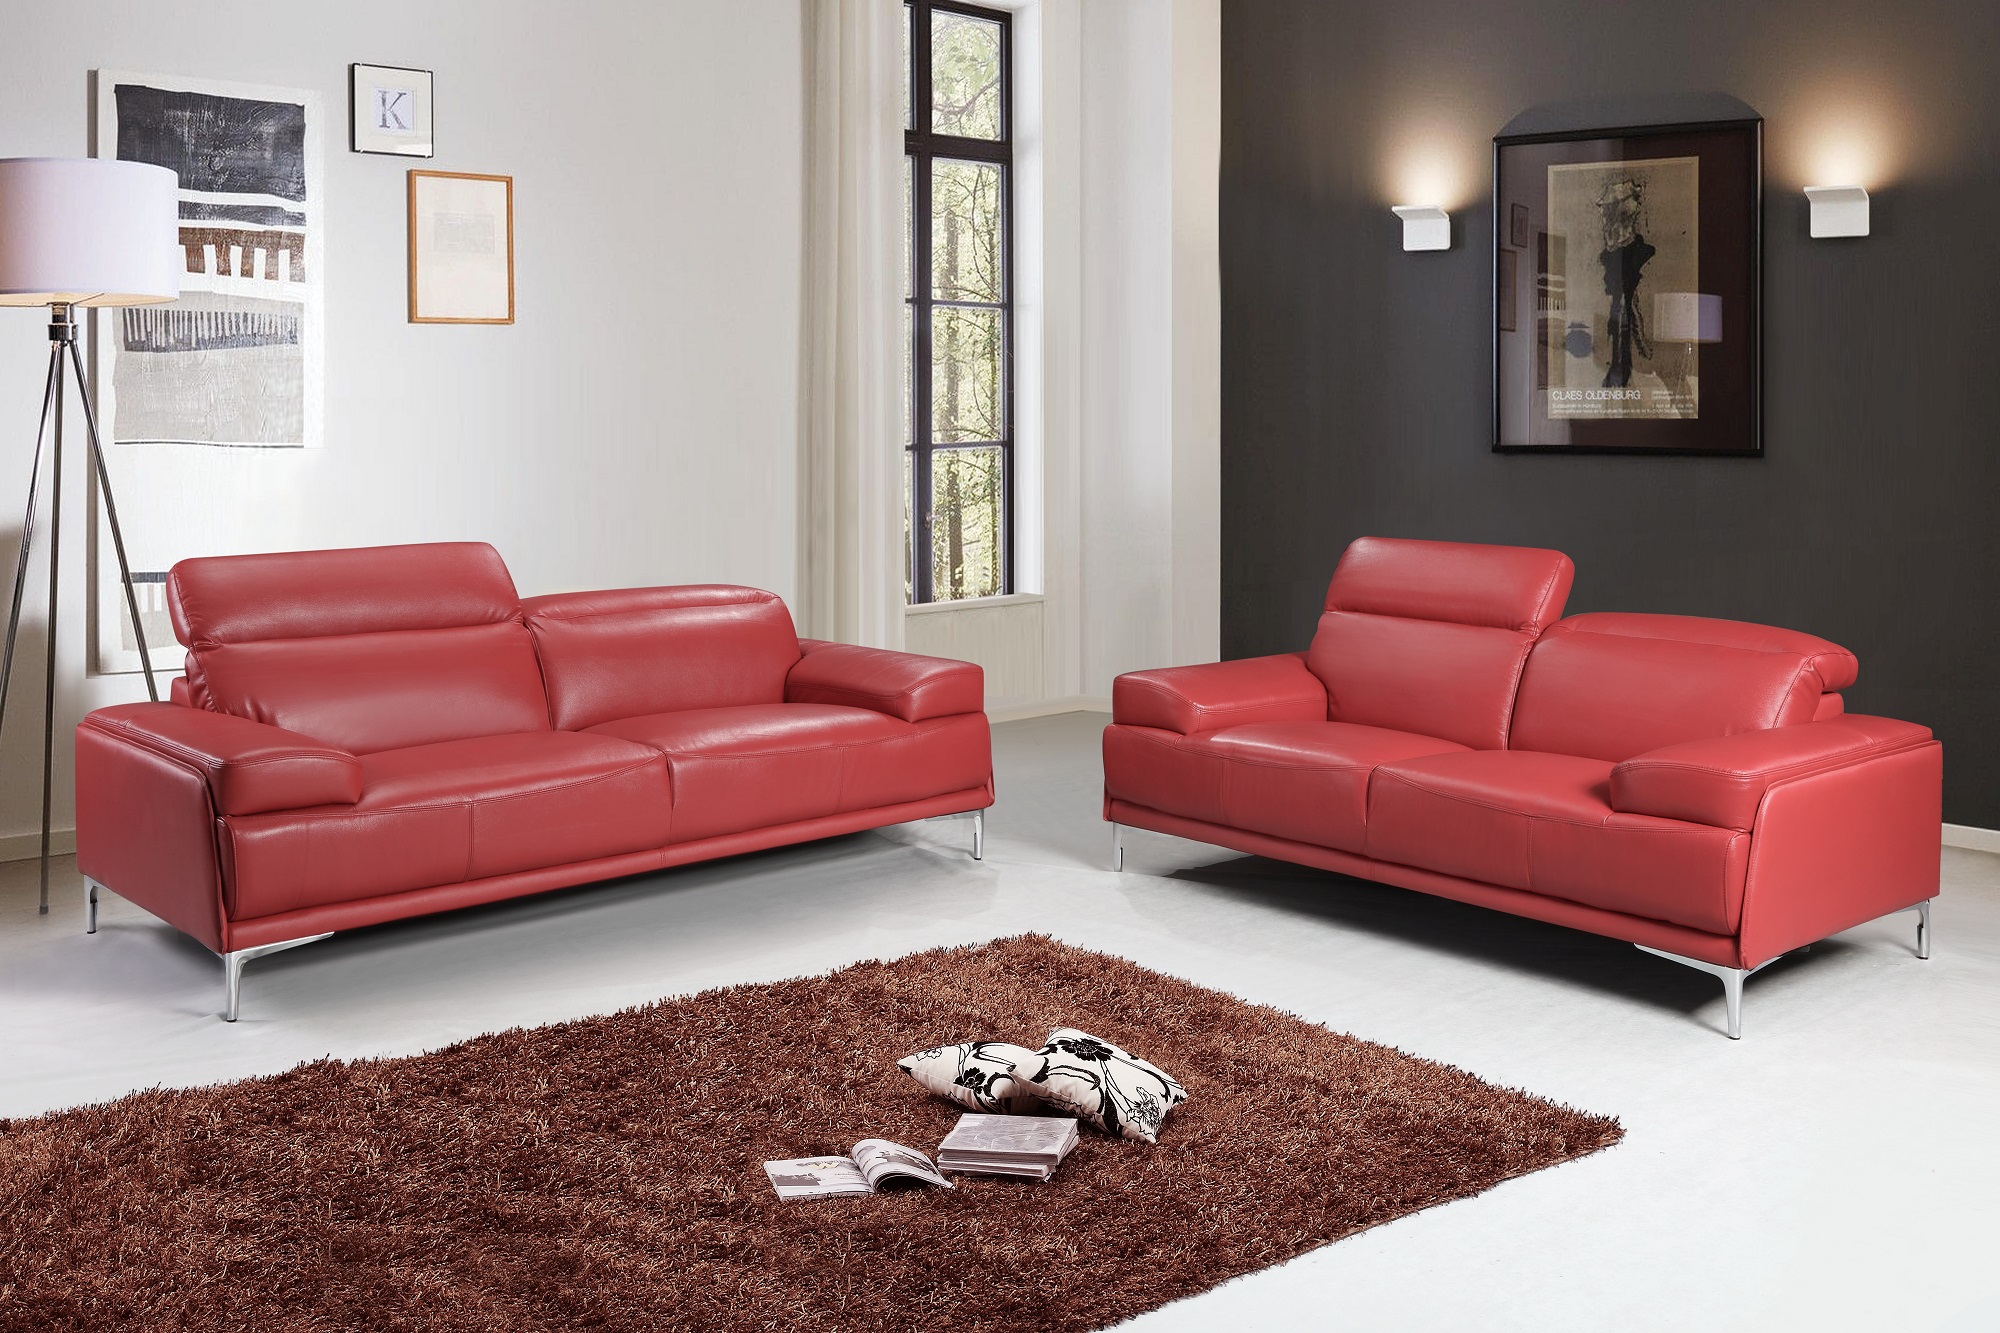 leather red sofa with one seat